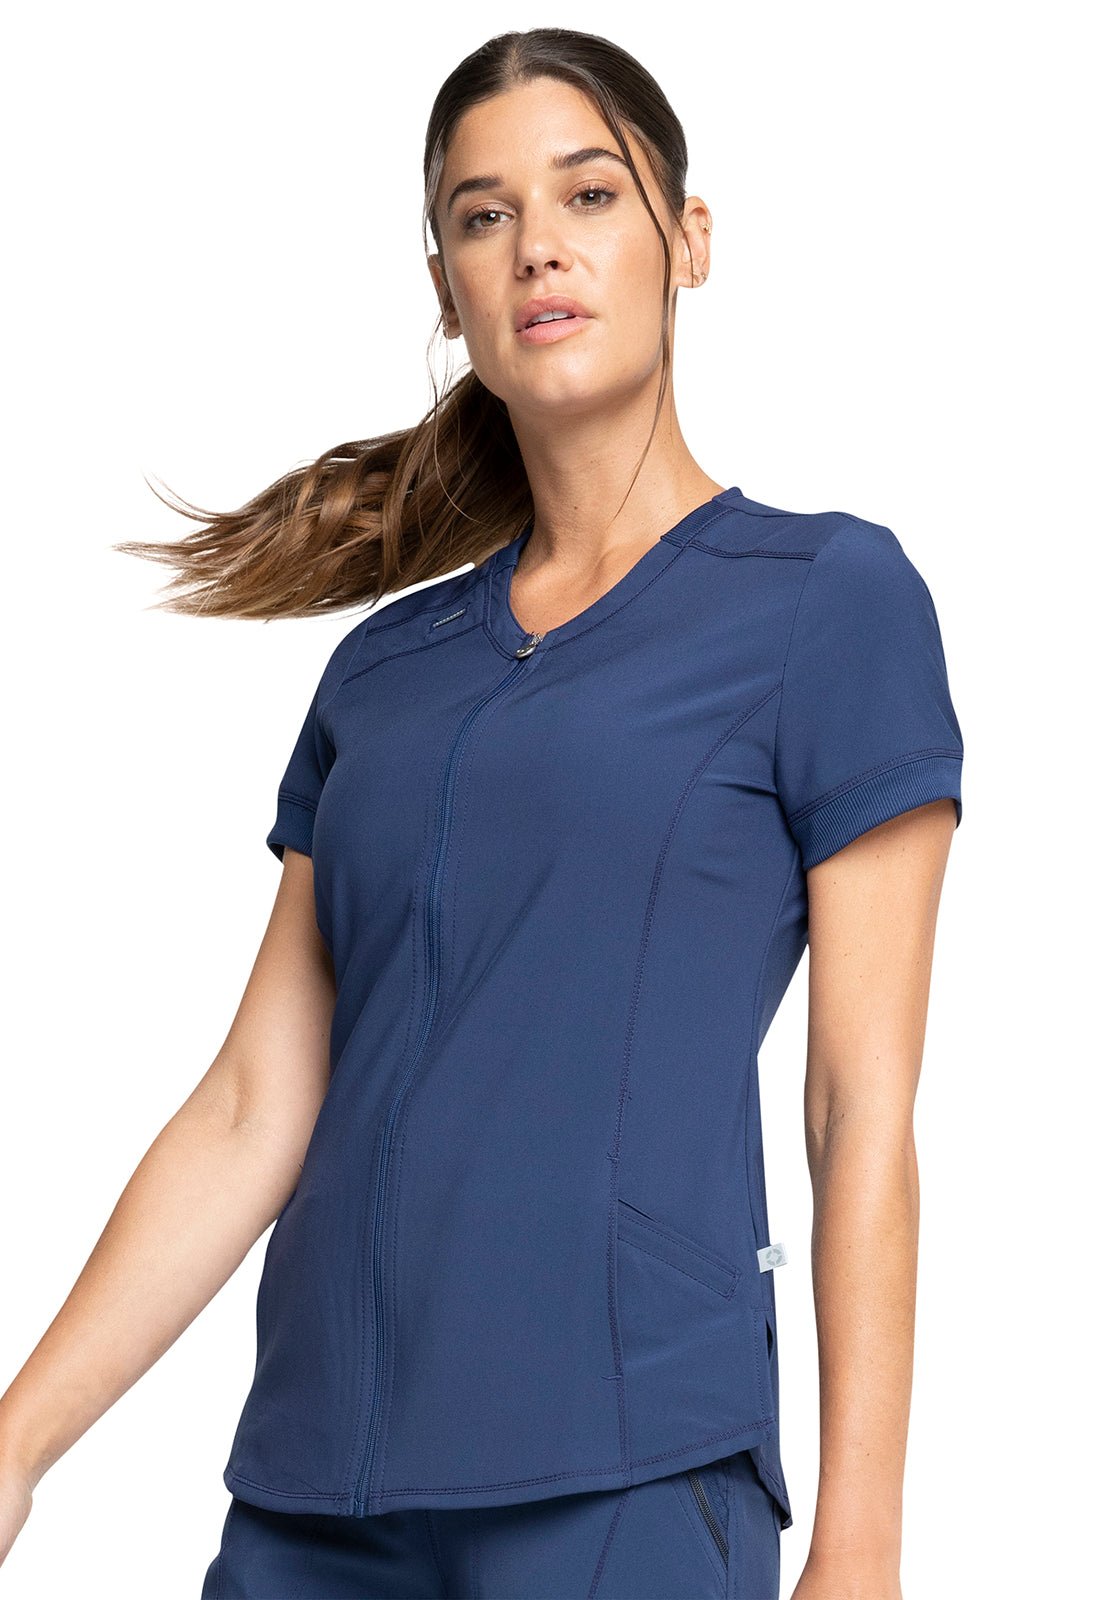 Cherokee Infinity Scrub Zip Front Top CK810A in Black Navy, Pewter, White - Scrubs Select